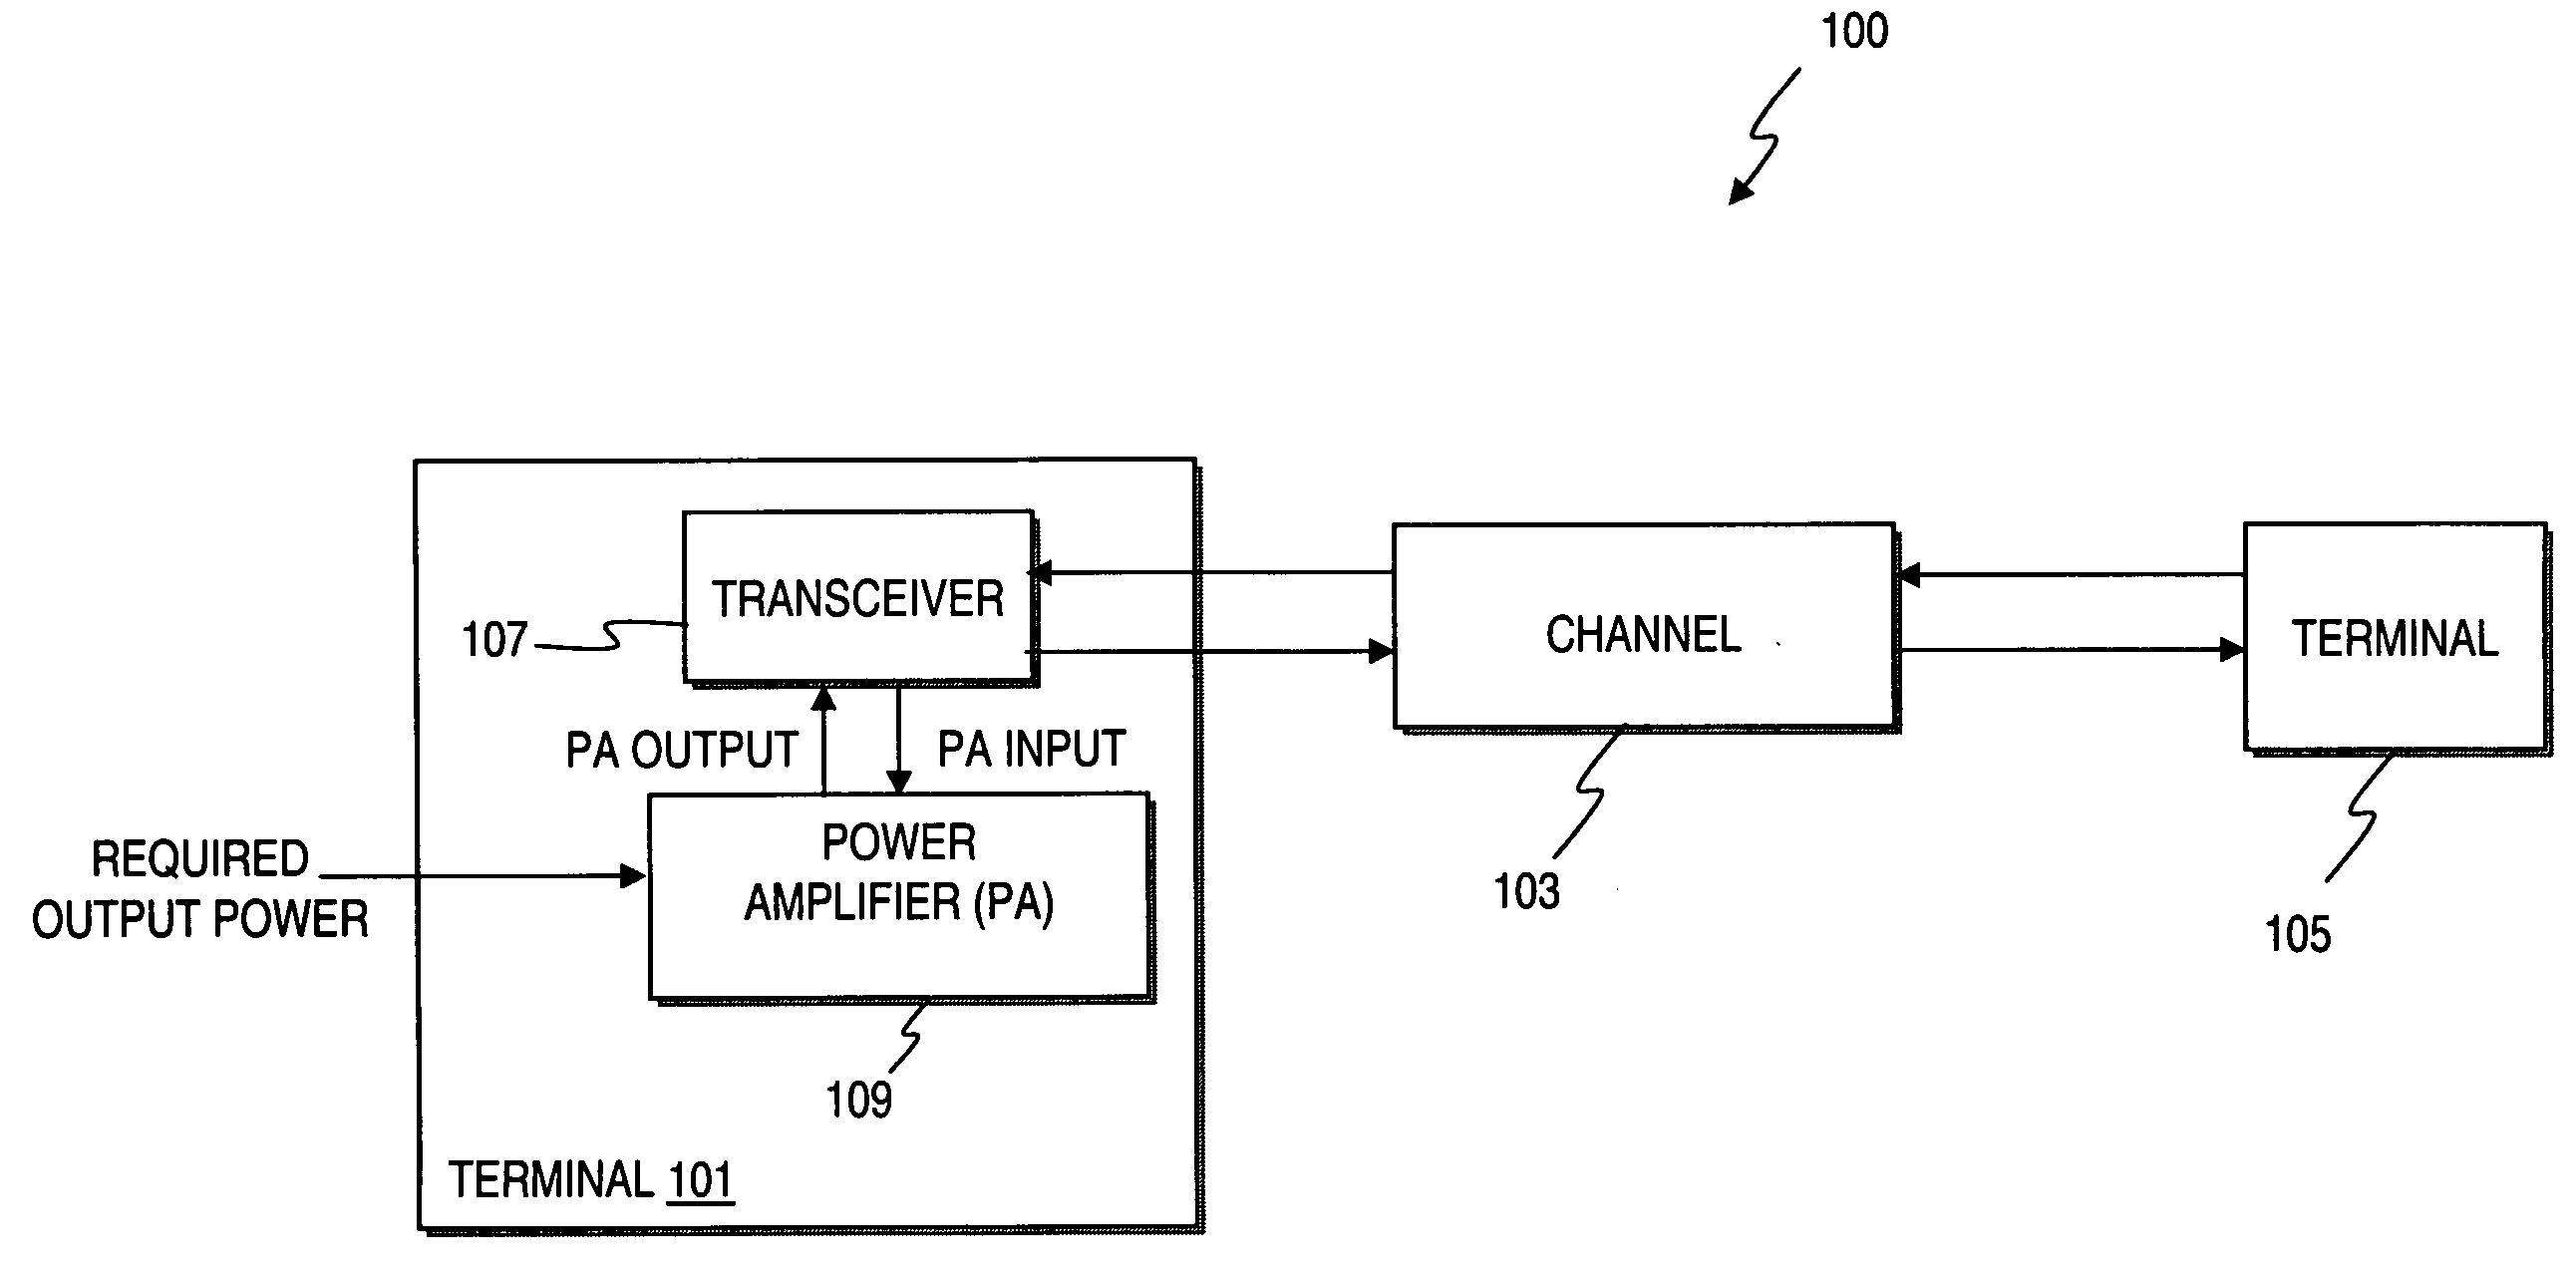 Method and apparatus for providing adaptive supply voltage control of a power amplifier